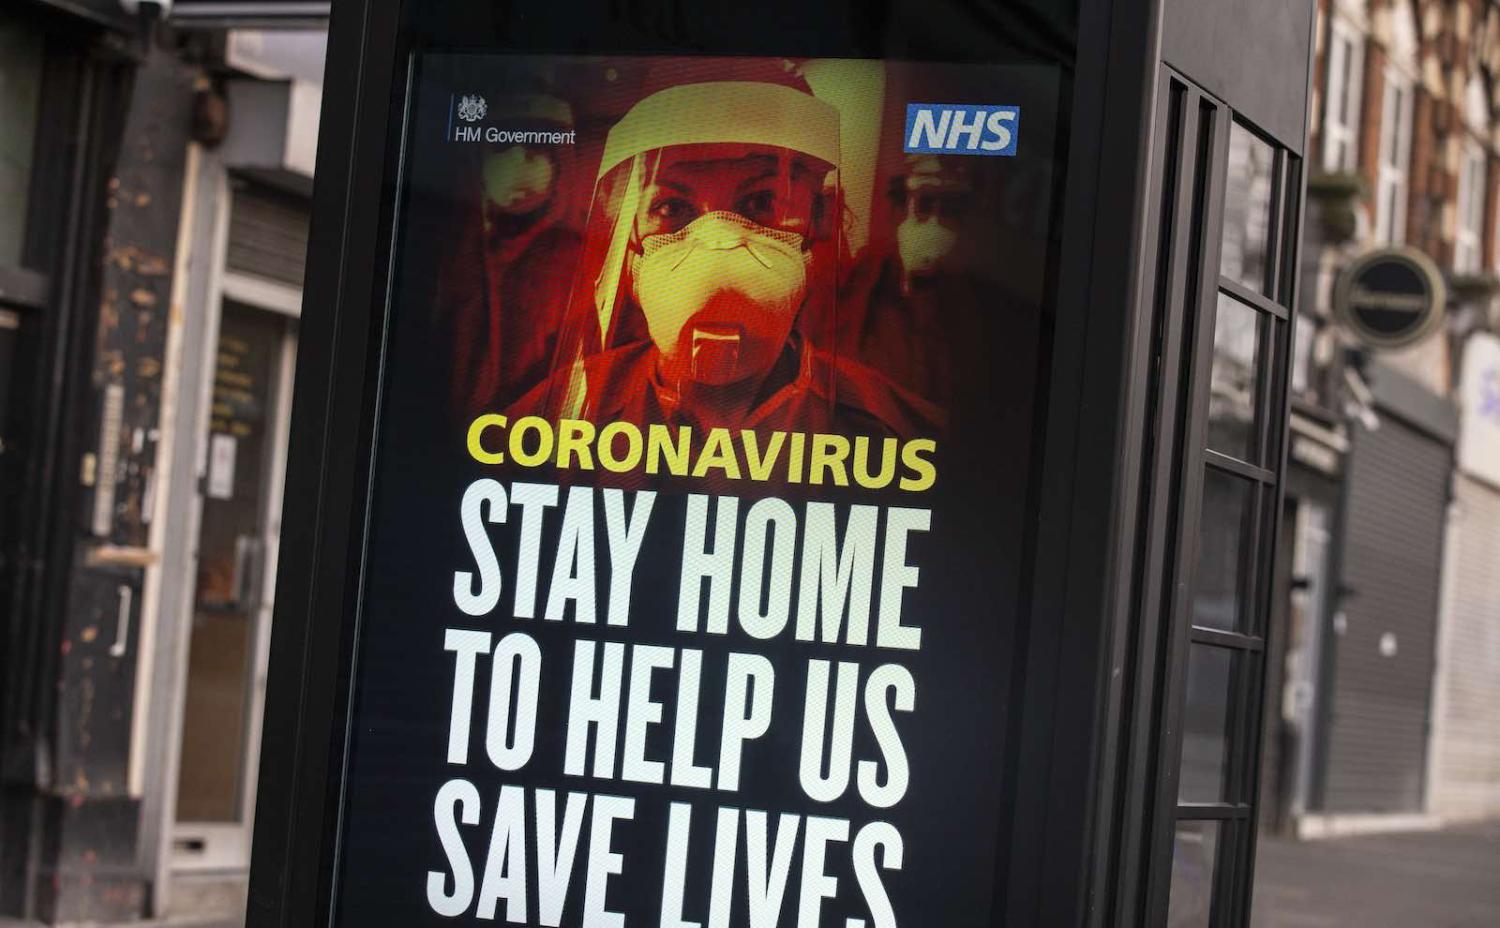 A message from the National Health Service on a billboard in Stamford Hill, London, 8 April (Hollie Adams/Getty Images)